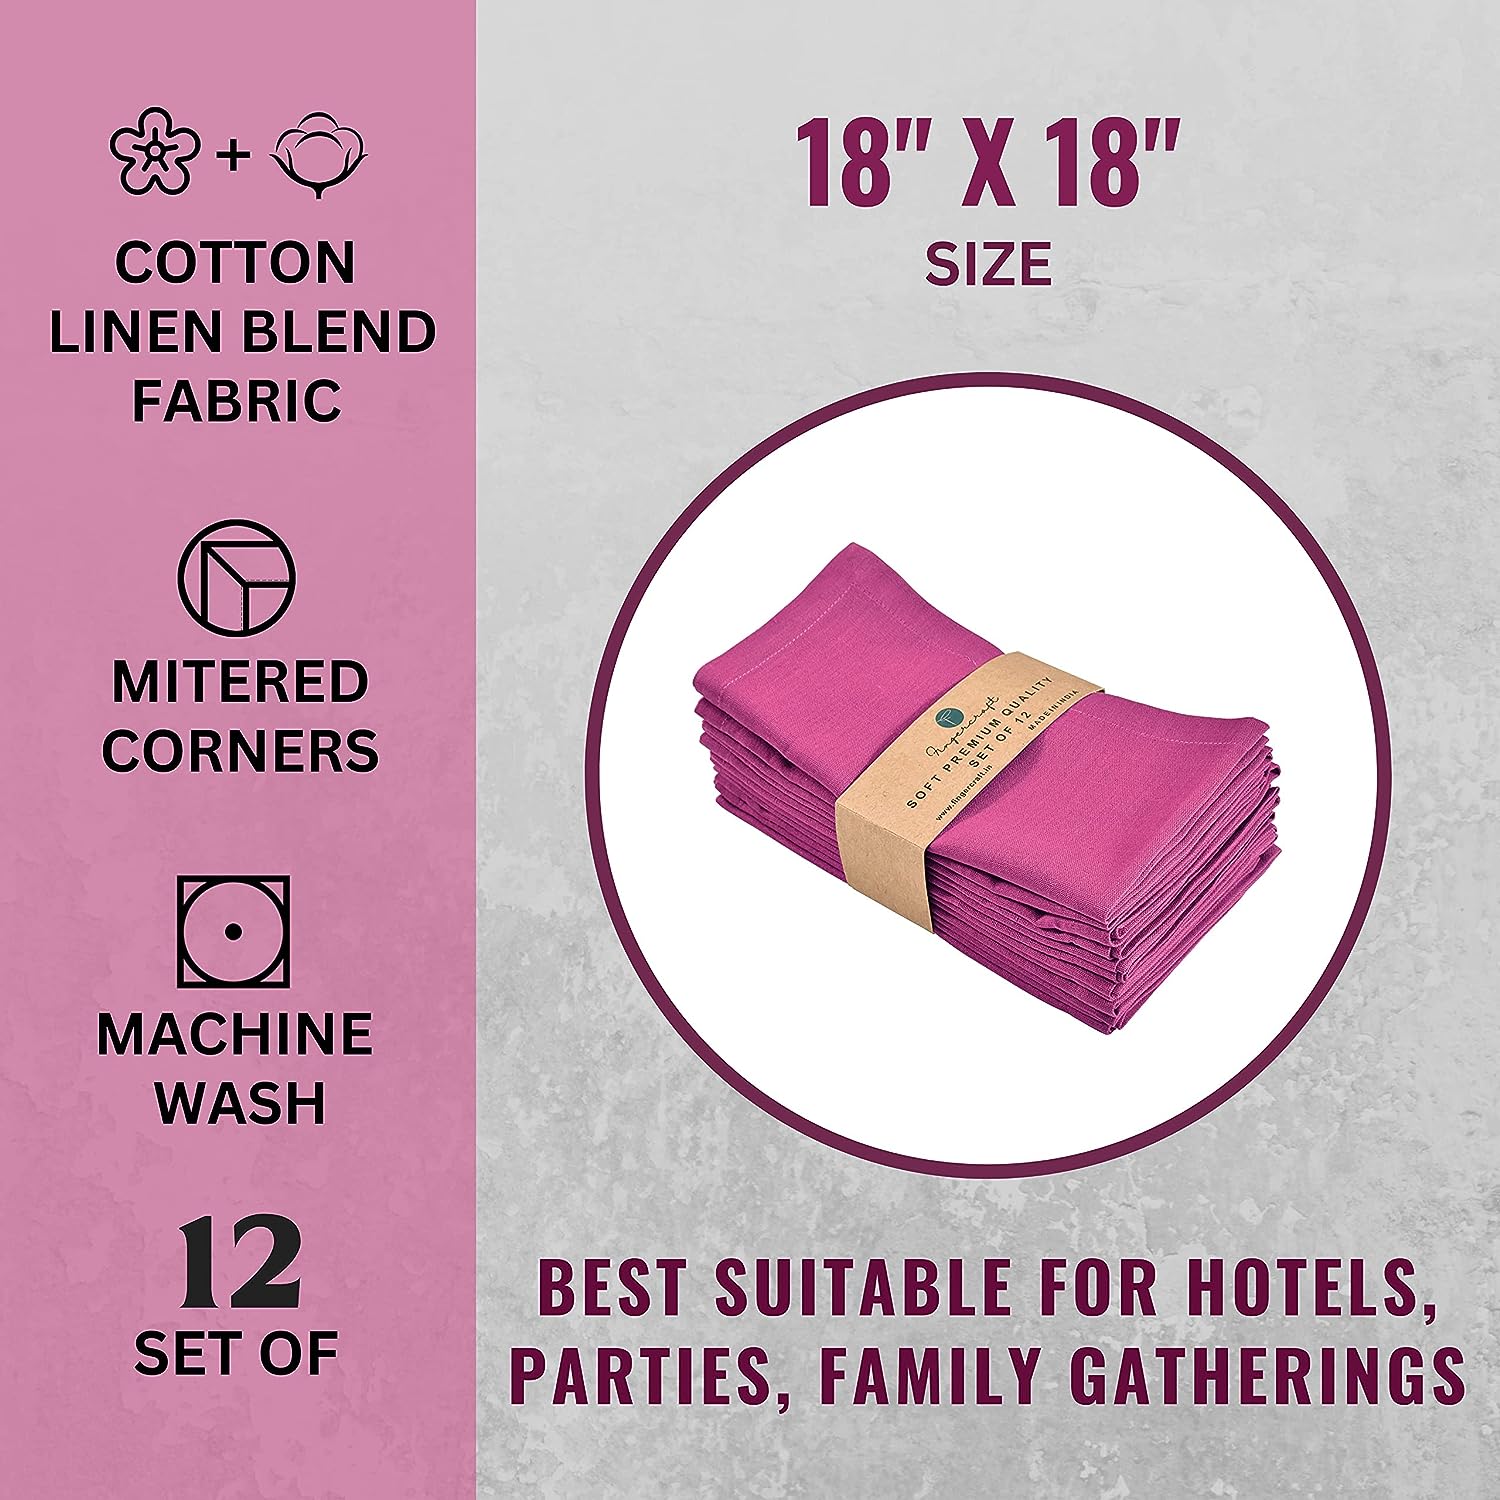 FINGERCRAFT Dinner Cloth Napkins, Cotton Linen Blend Fabric 12 Pack Easter Special, Premium Quality, Mitered Corners for Every Day Use Napkins are Pre Shrunk and Good Absorbency Magenta 4